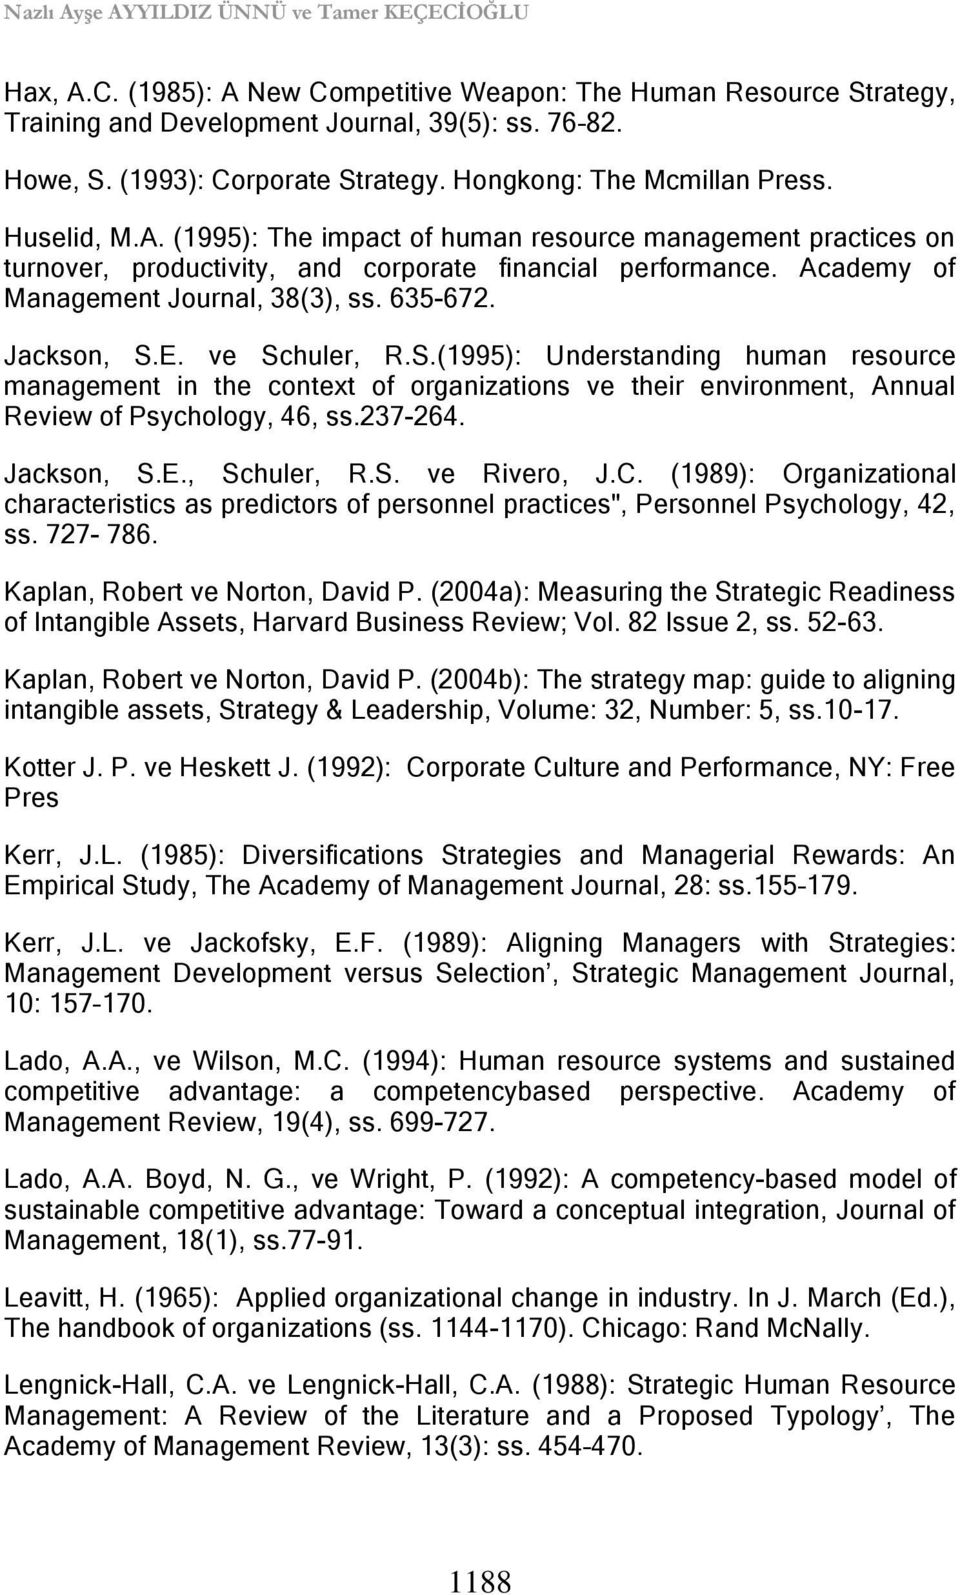 Academy of Management Journal, 38(3), ss. 635-672. Jackson, S.E. ve Schuler, R.S.(1995): Understanding human resource management in the context of organizations ve their environment, Annual Review of Psychology, 46, ss.